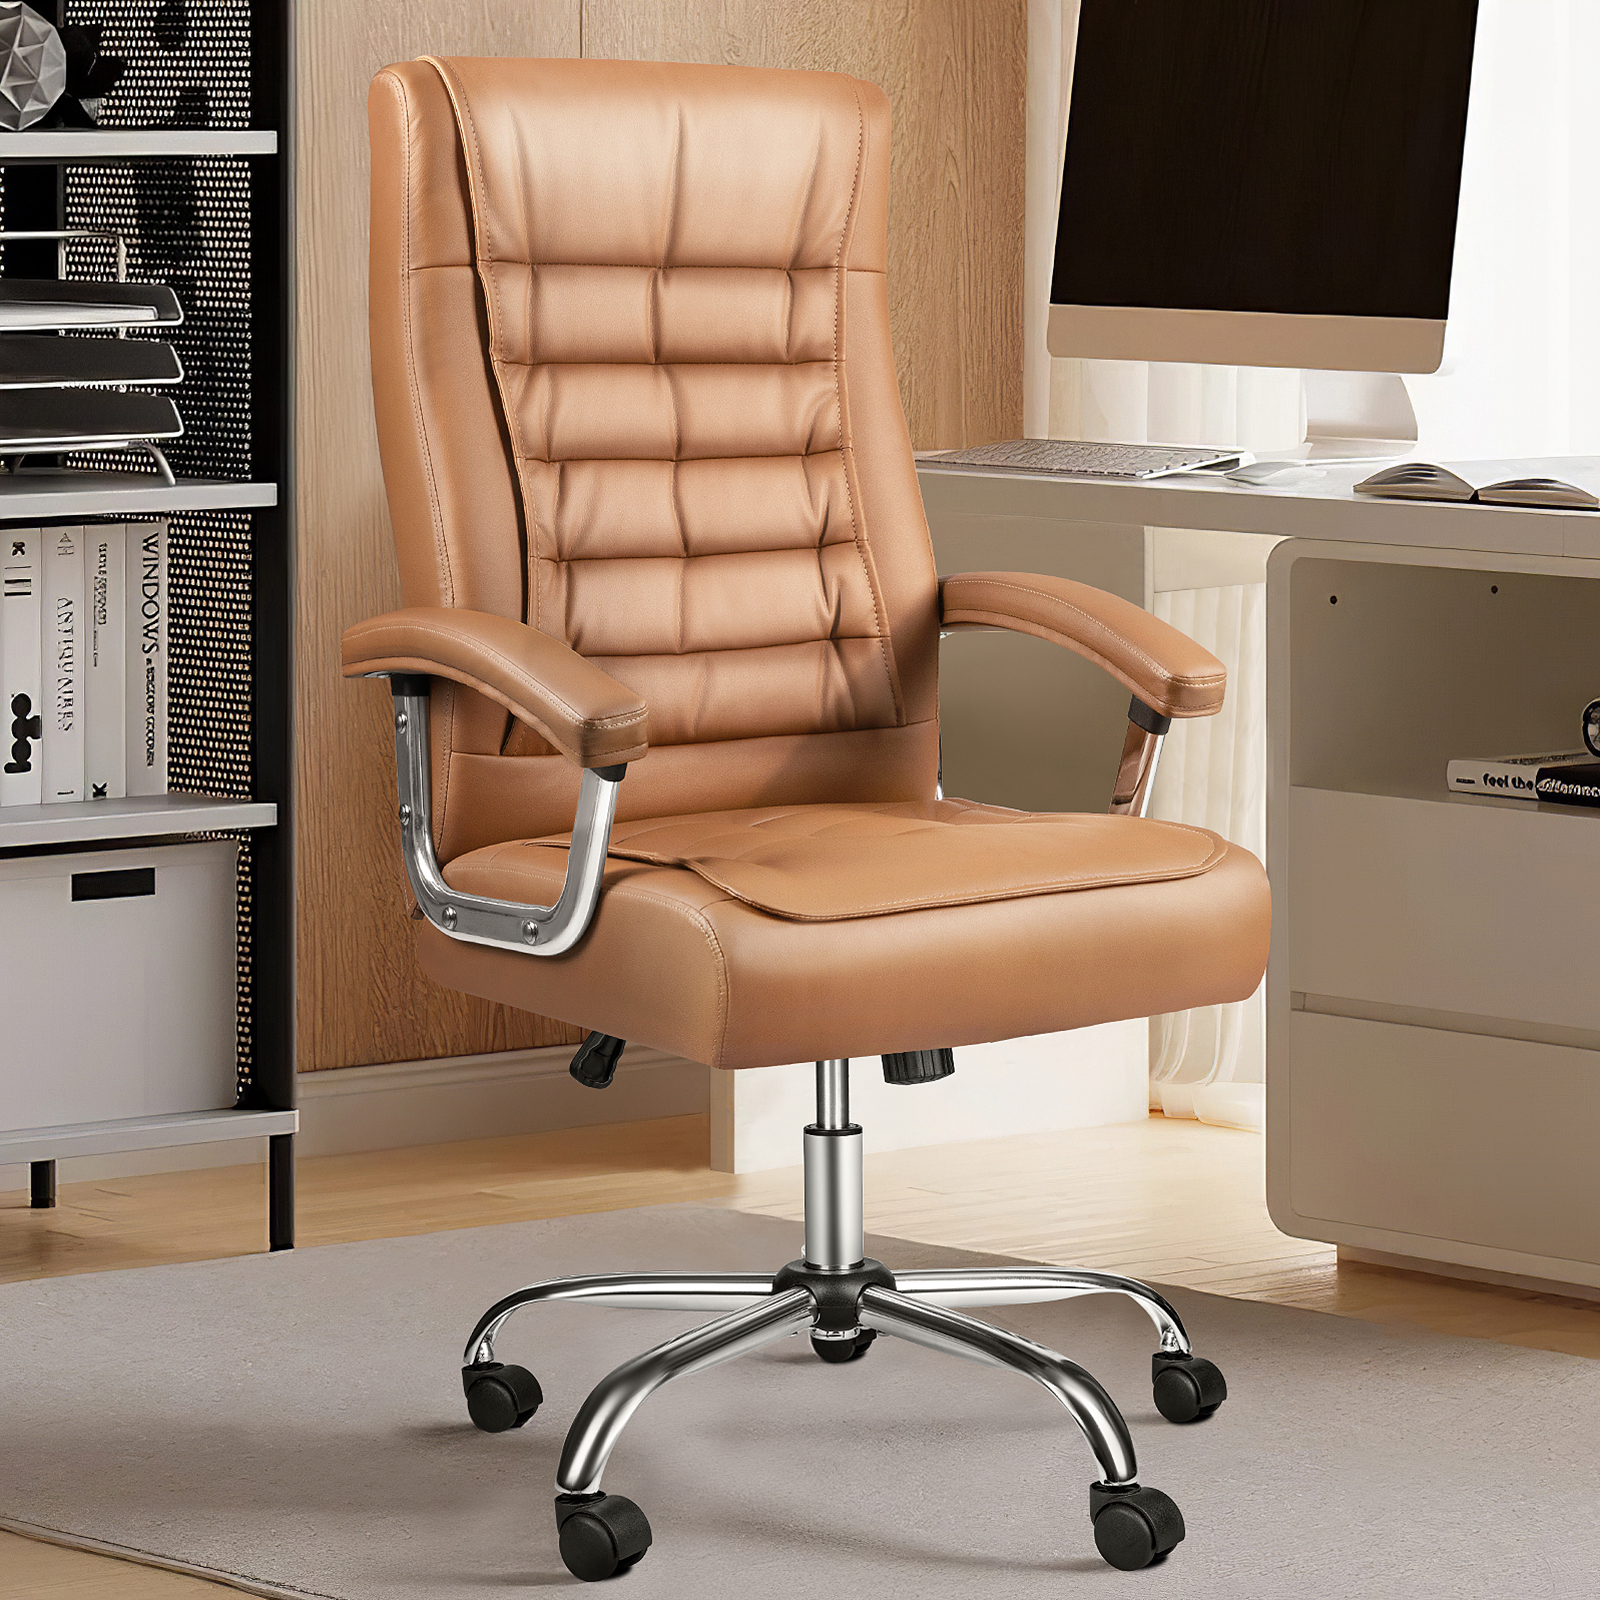 Waleaf Office Chair with Spring Cushion,400LBS High Back Computer Chair with Padded Armrest, Khaki - image 2 of 7